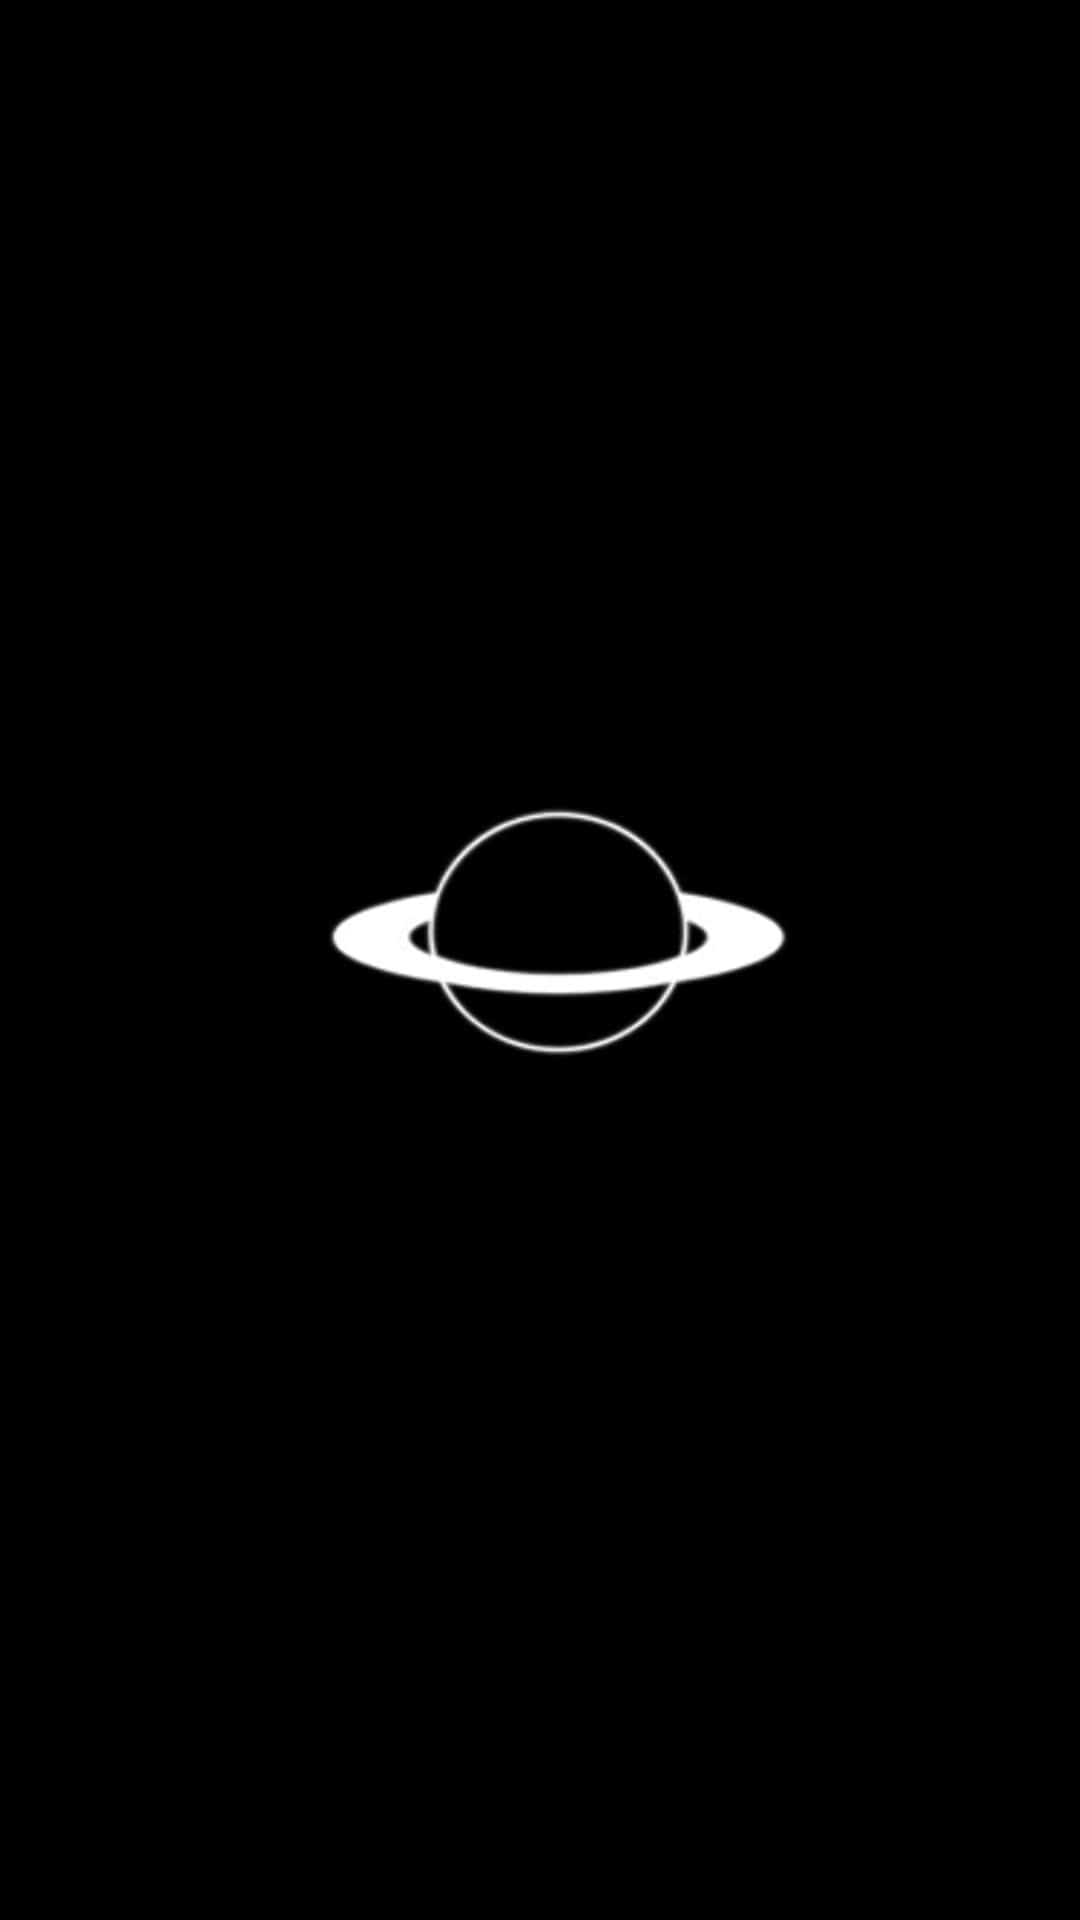 Aesthetic White And Black Iphone Saturn Wallpaper